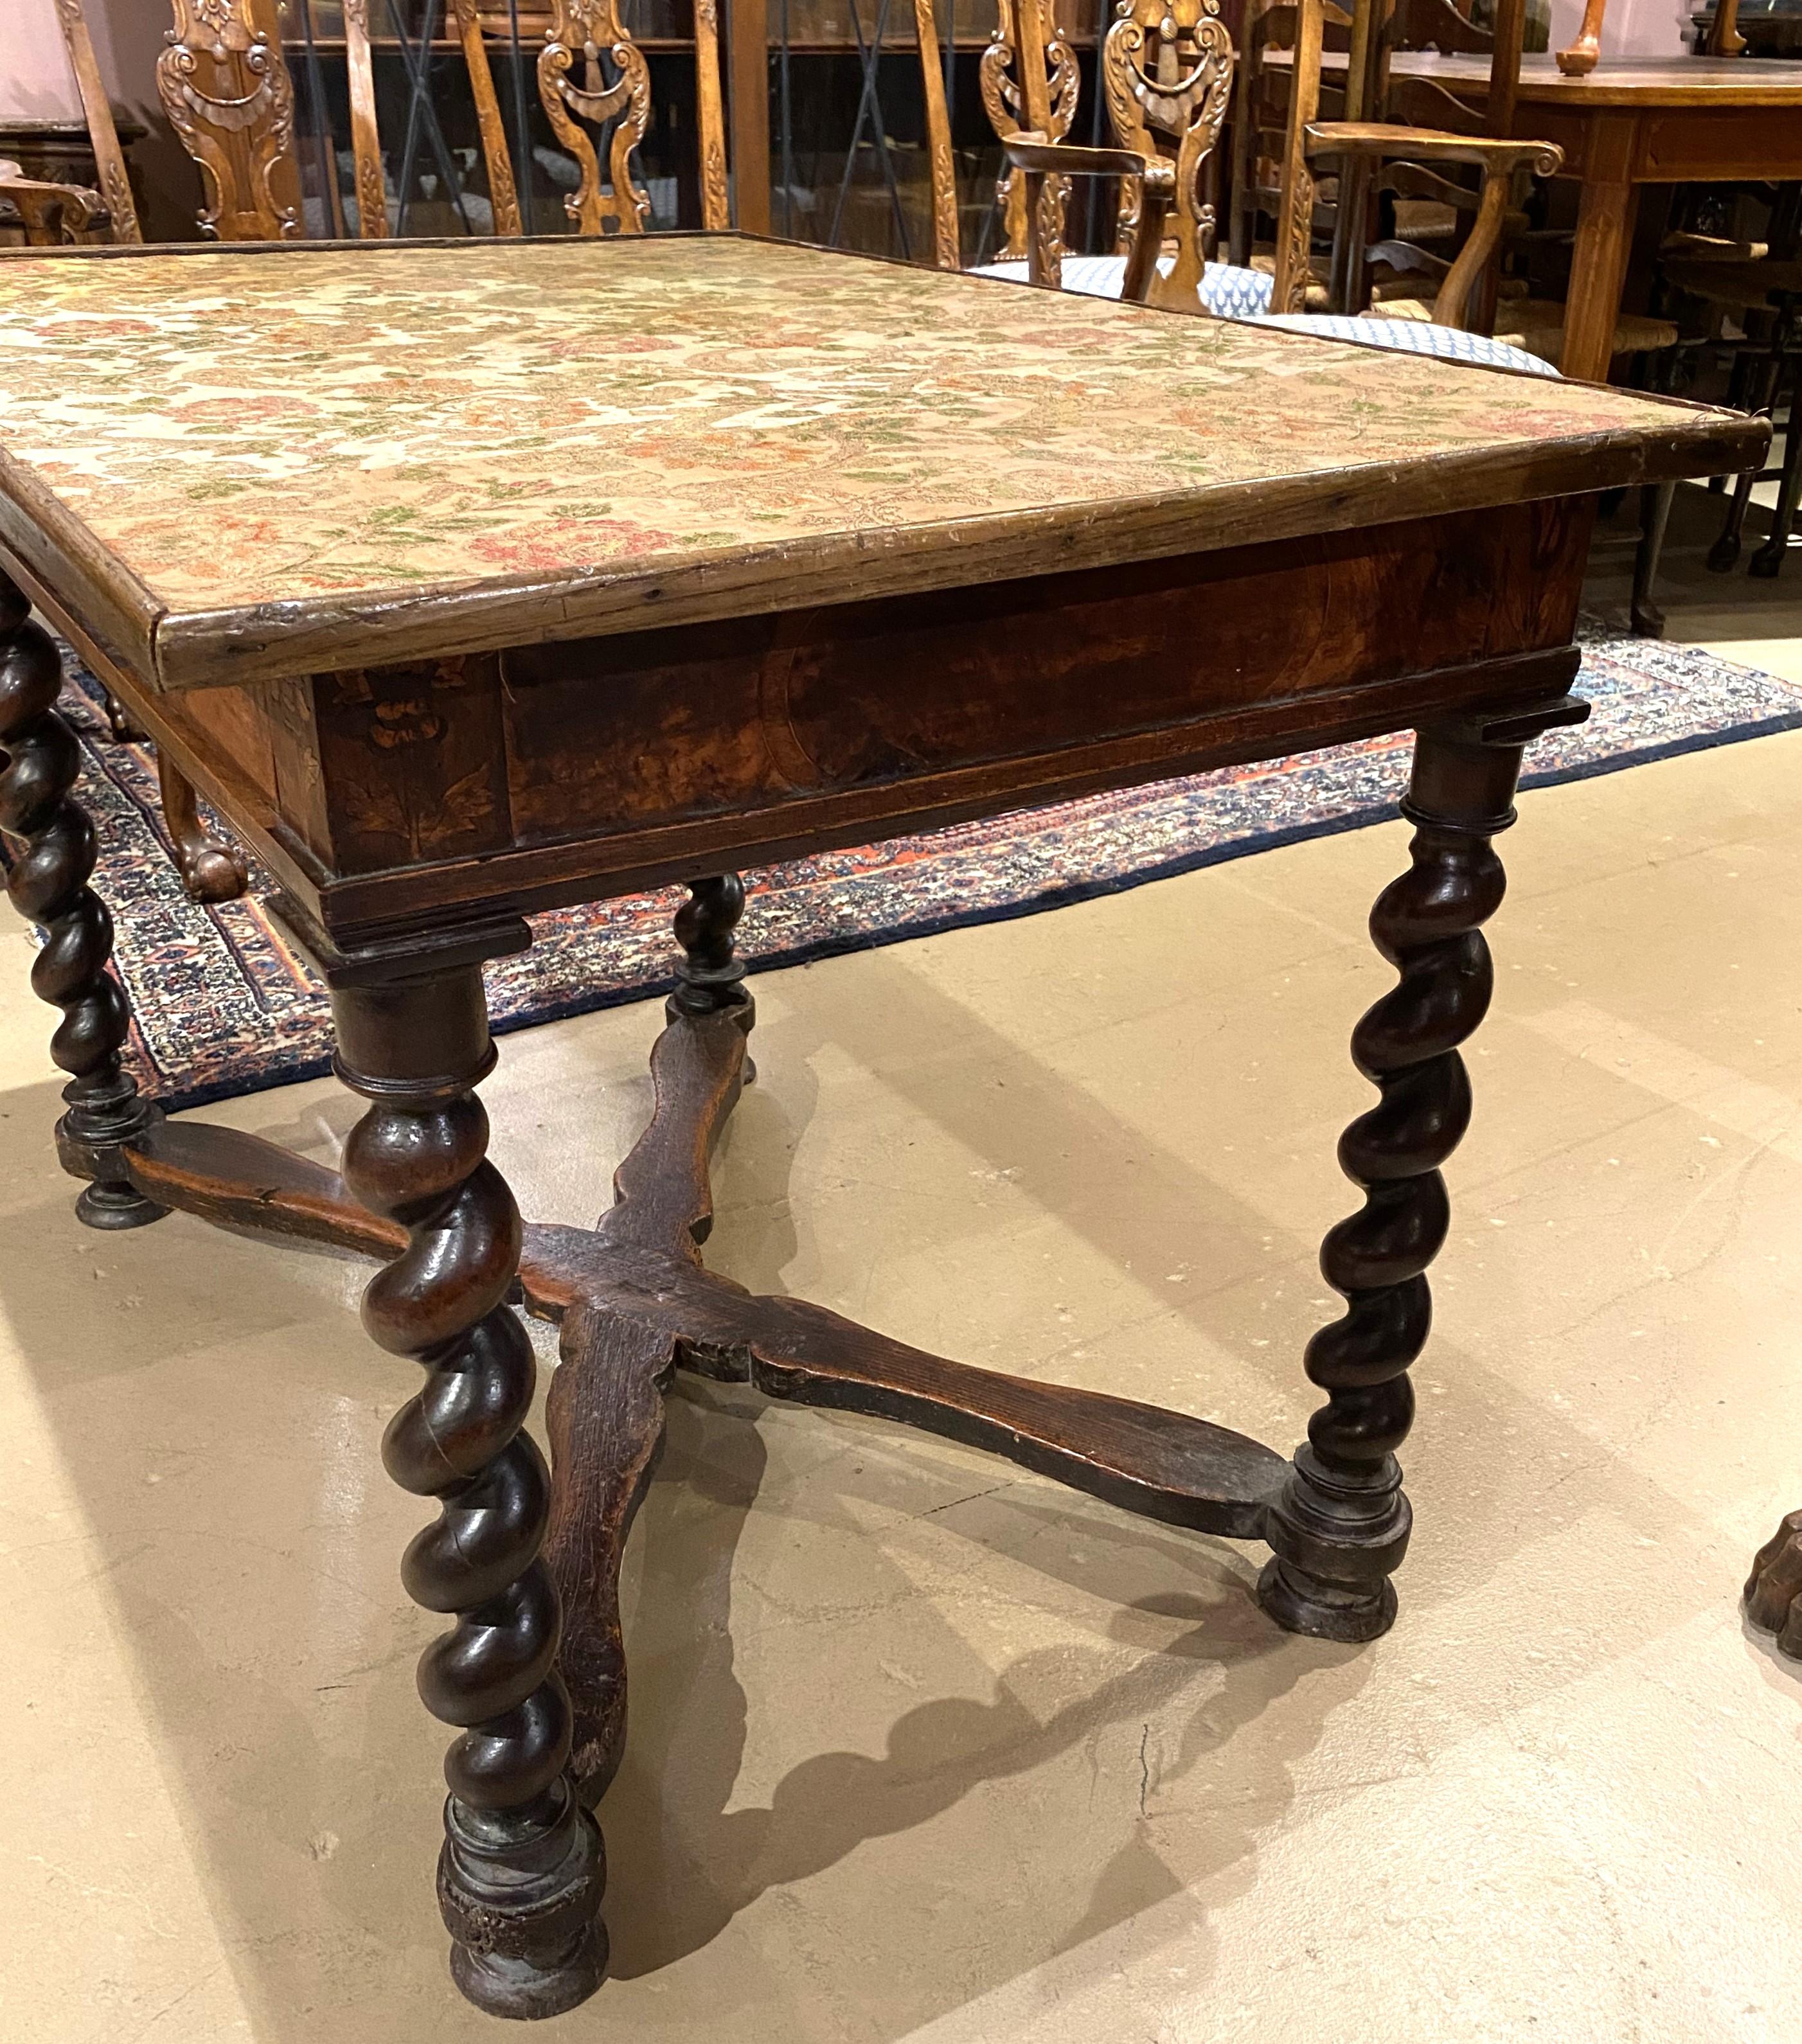 18th c Continental Fruitwood Table with Fabric Lined Top and Barley Twist Legs In Good Condition For Sale In Milford, NH